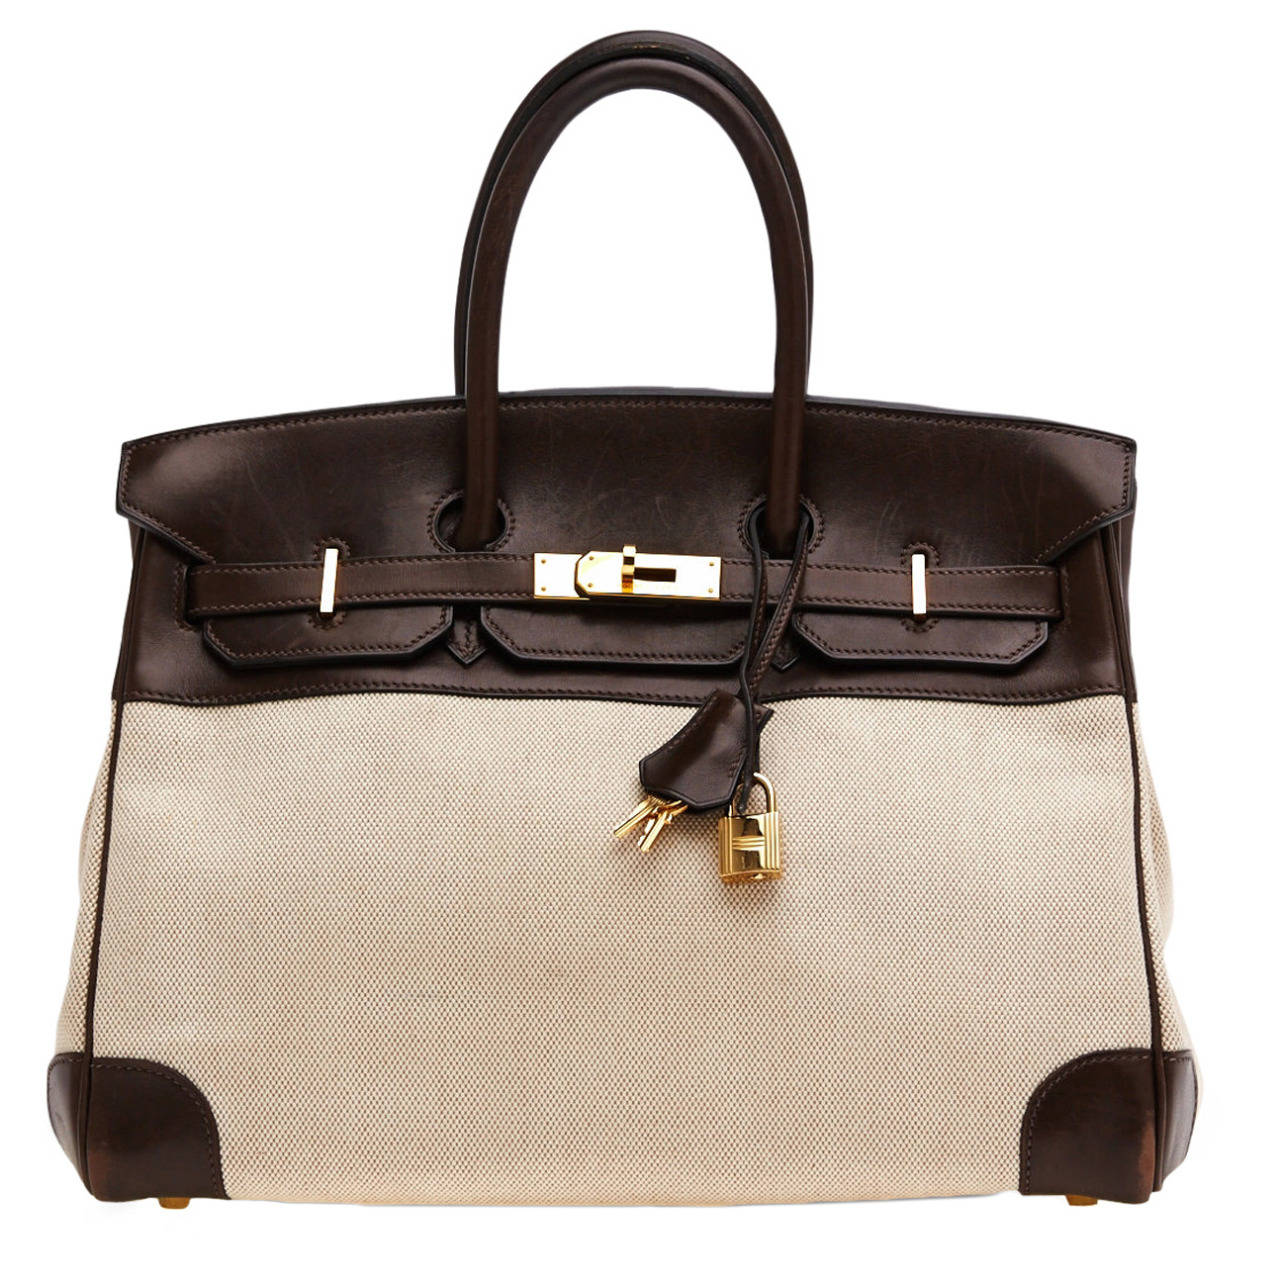 Hermes Birkin Canvas and Leather 35